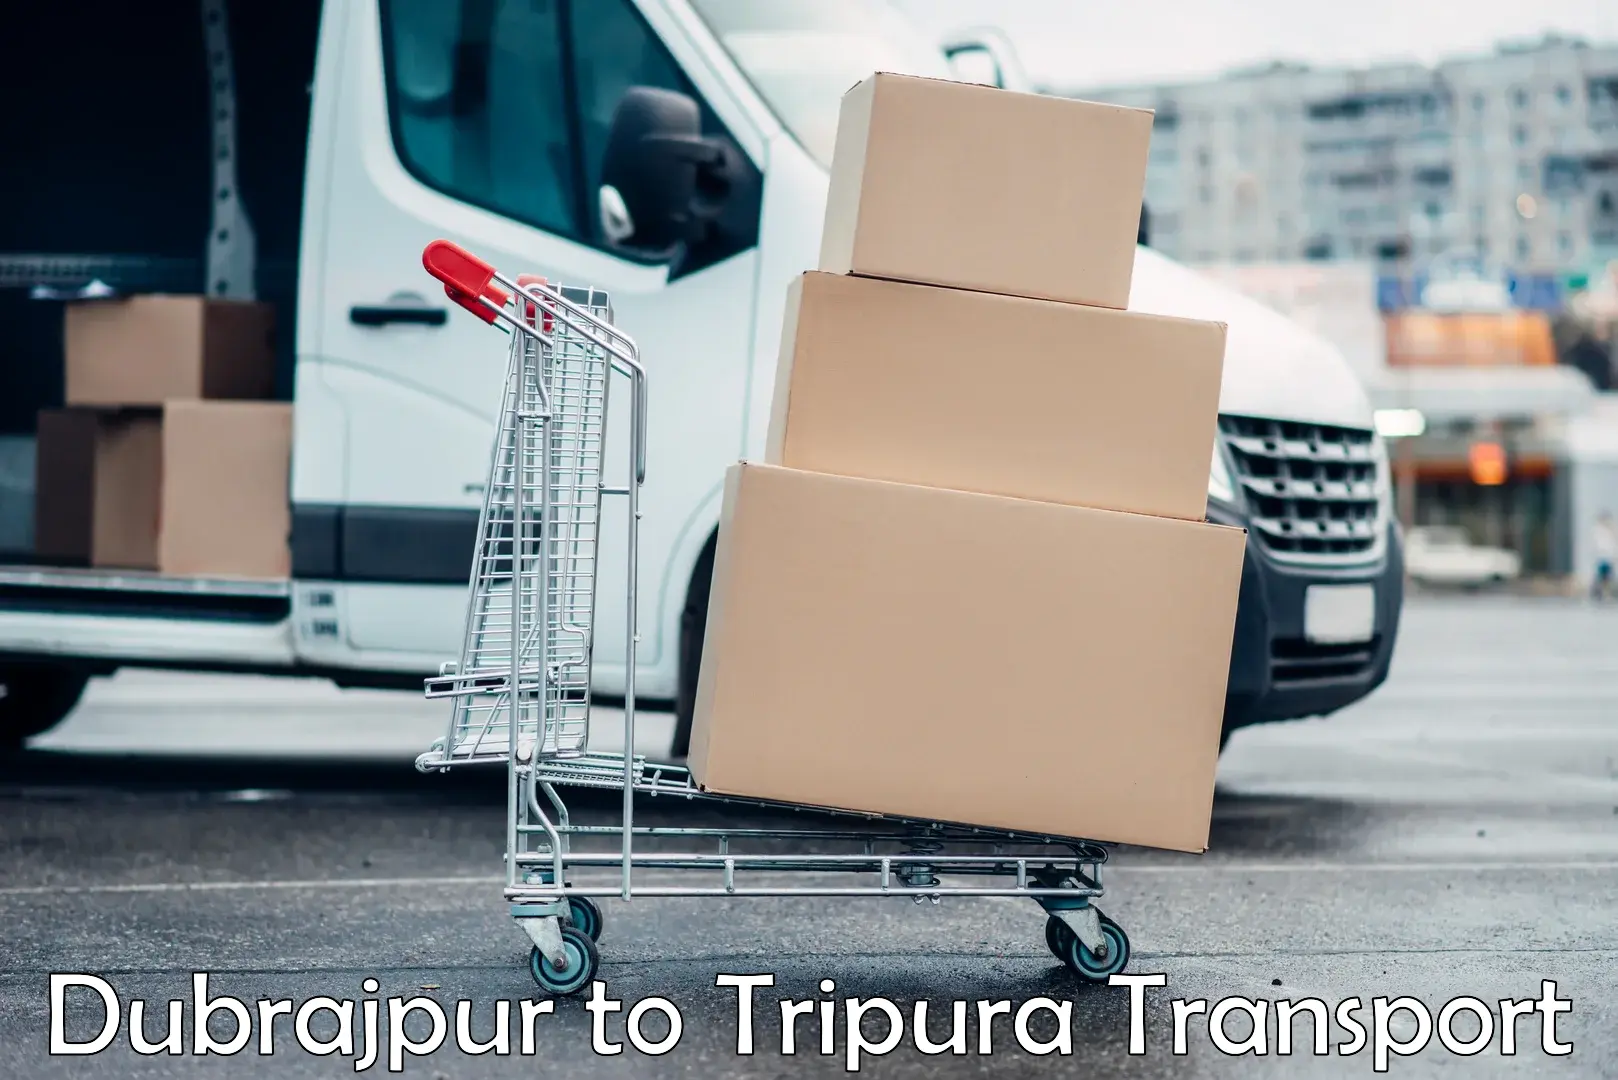 Road transport online services in Dubrajpur to Udaipur Tripura